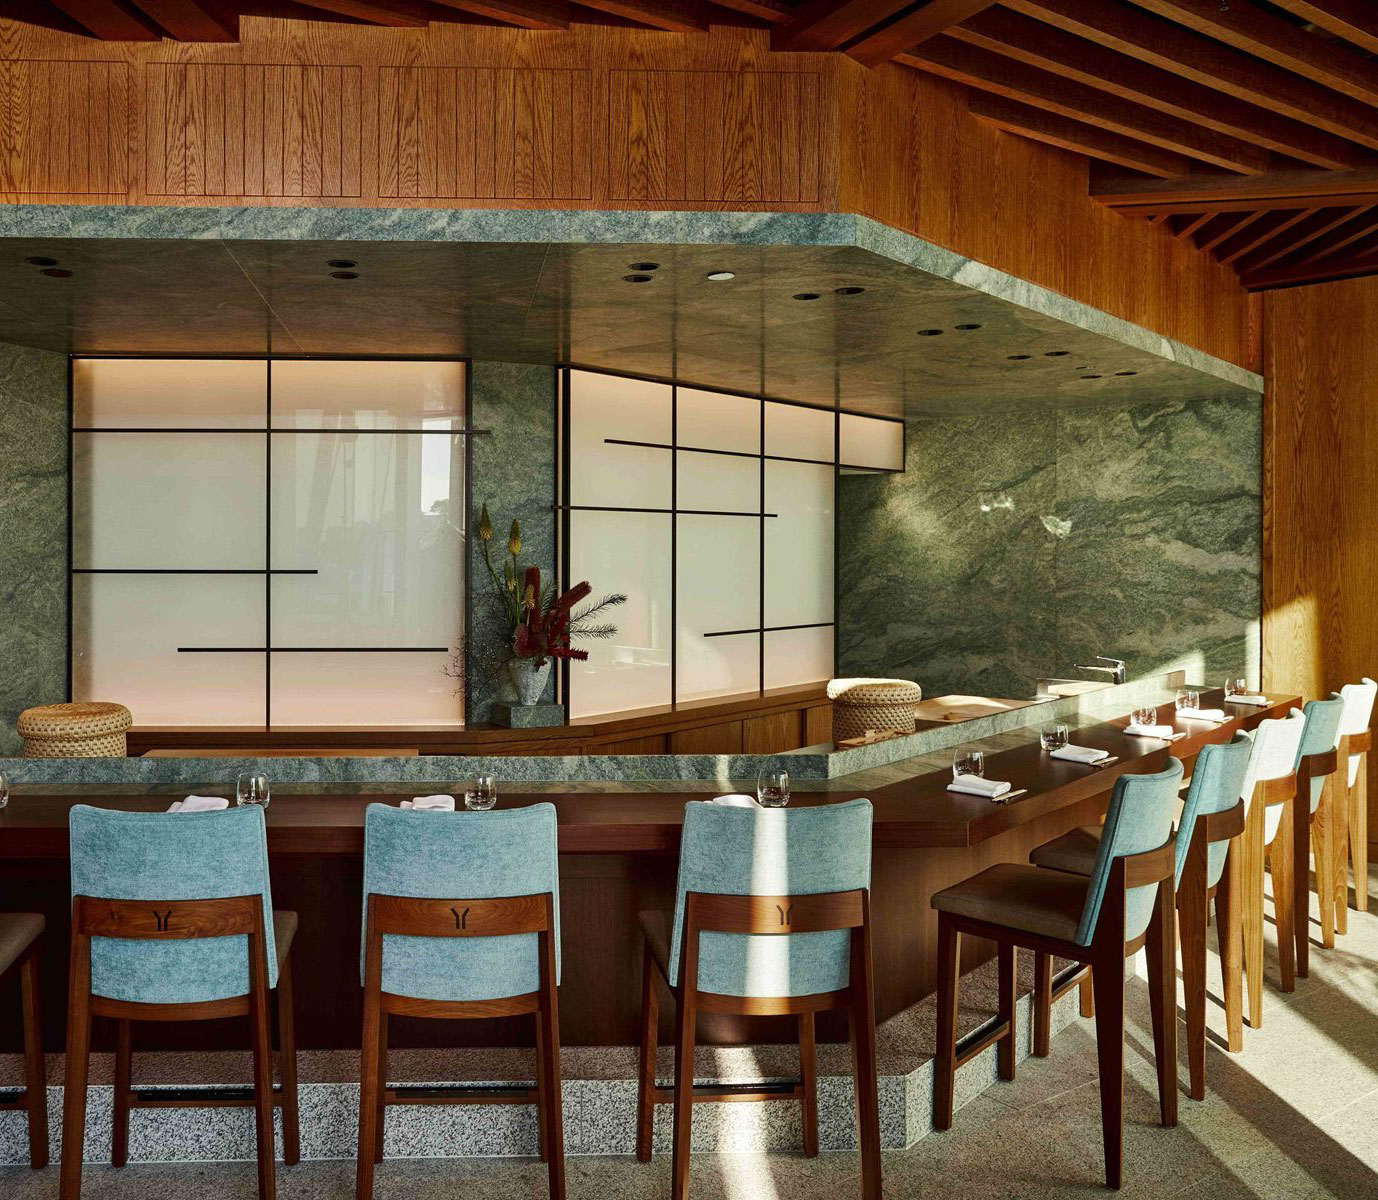 The handsome 10-seat omakase bar at Yoshii's Omakase, one of the best restaurants in Sydney